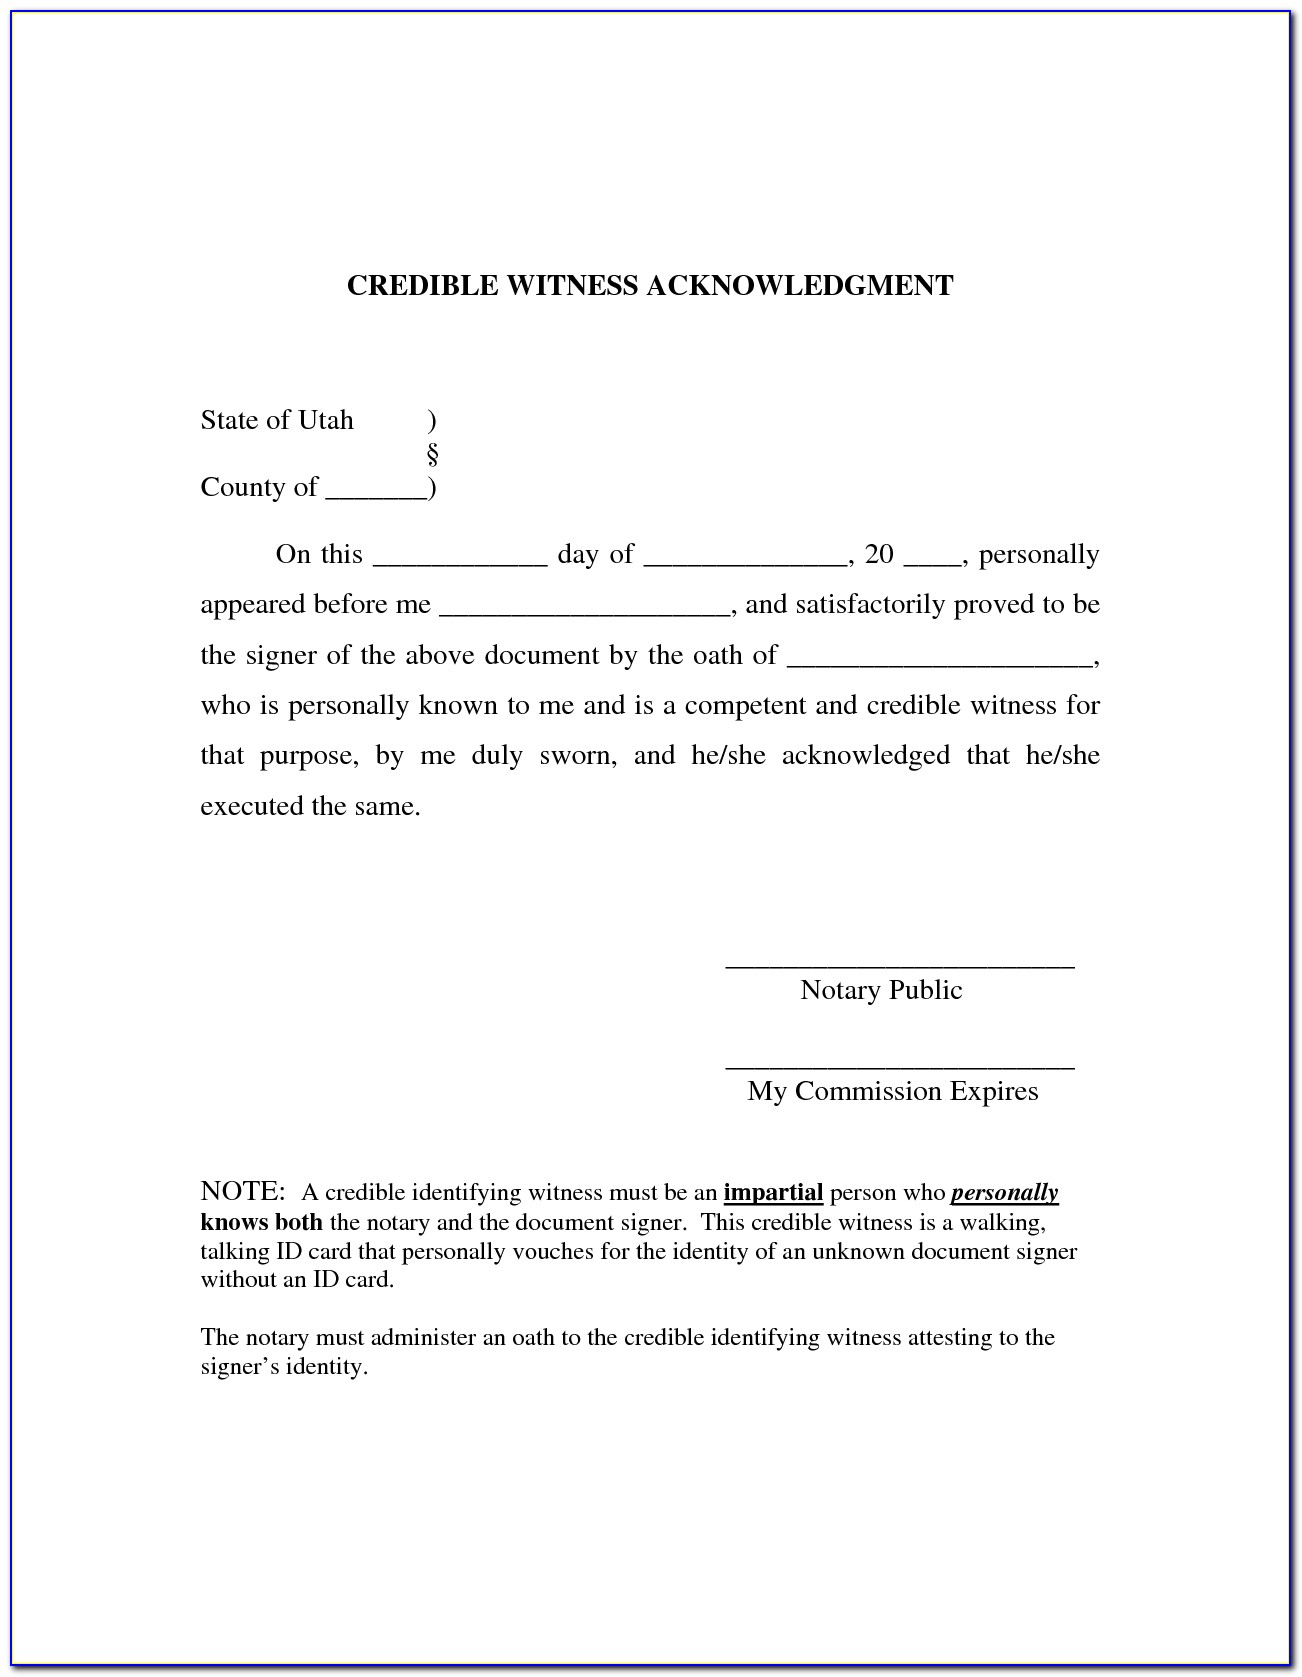 Texas Notary Certificate Of Acknowledgement